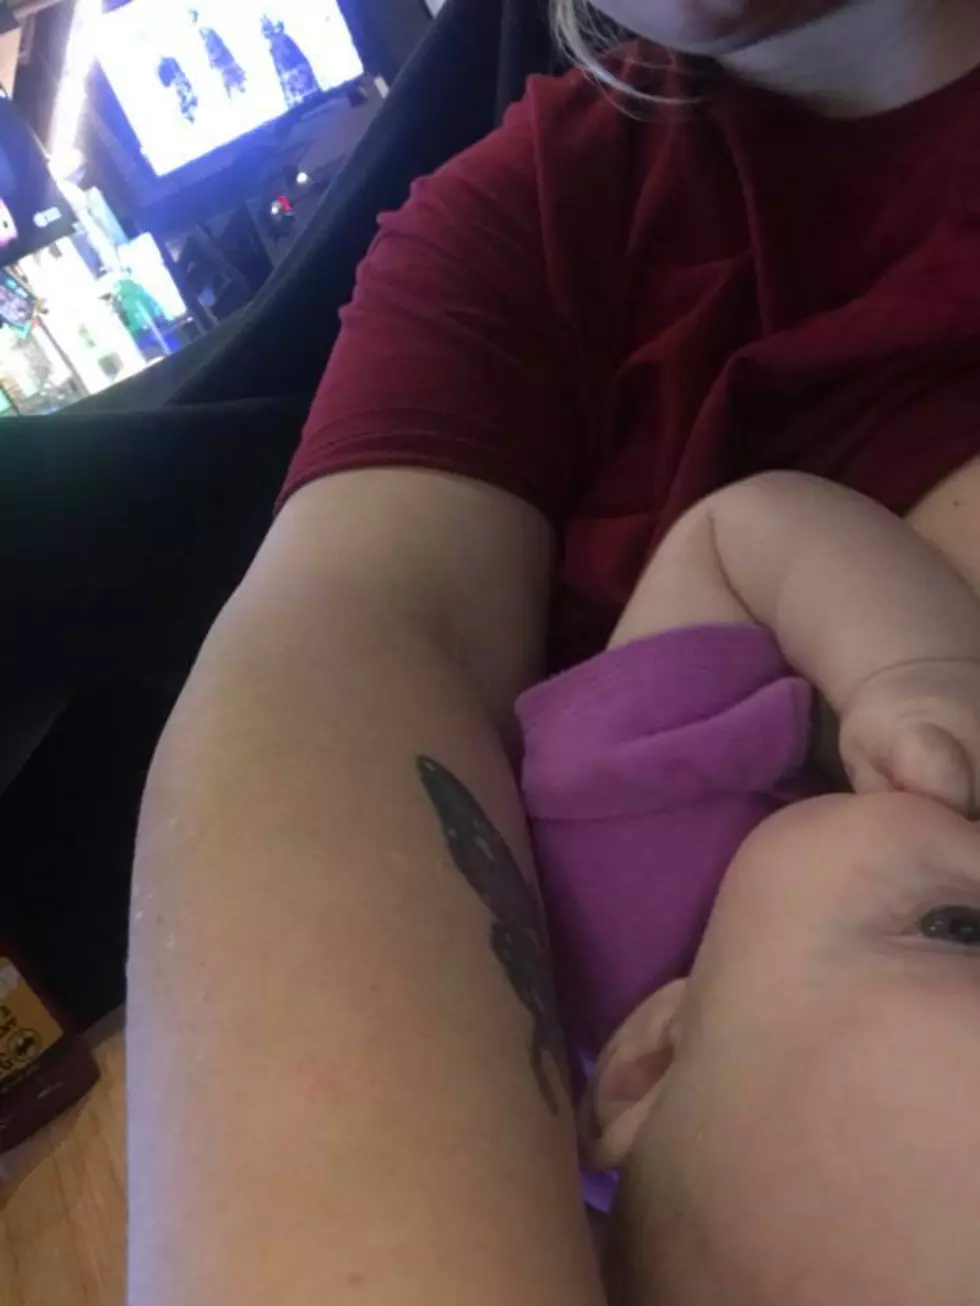 Breastfeeding Sit-In Planned for Tuesday in Bossier City